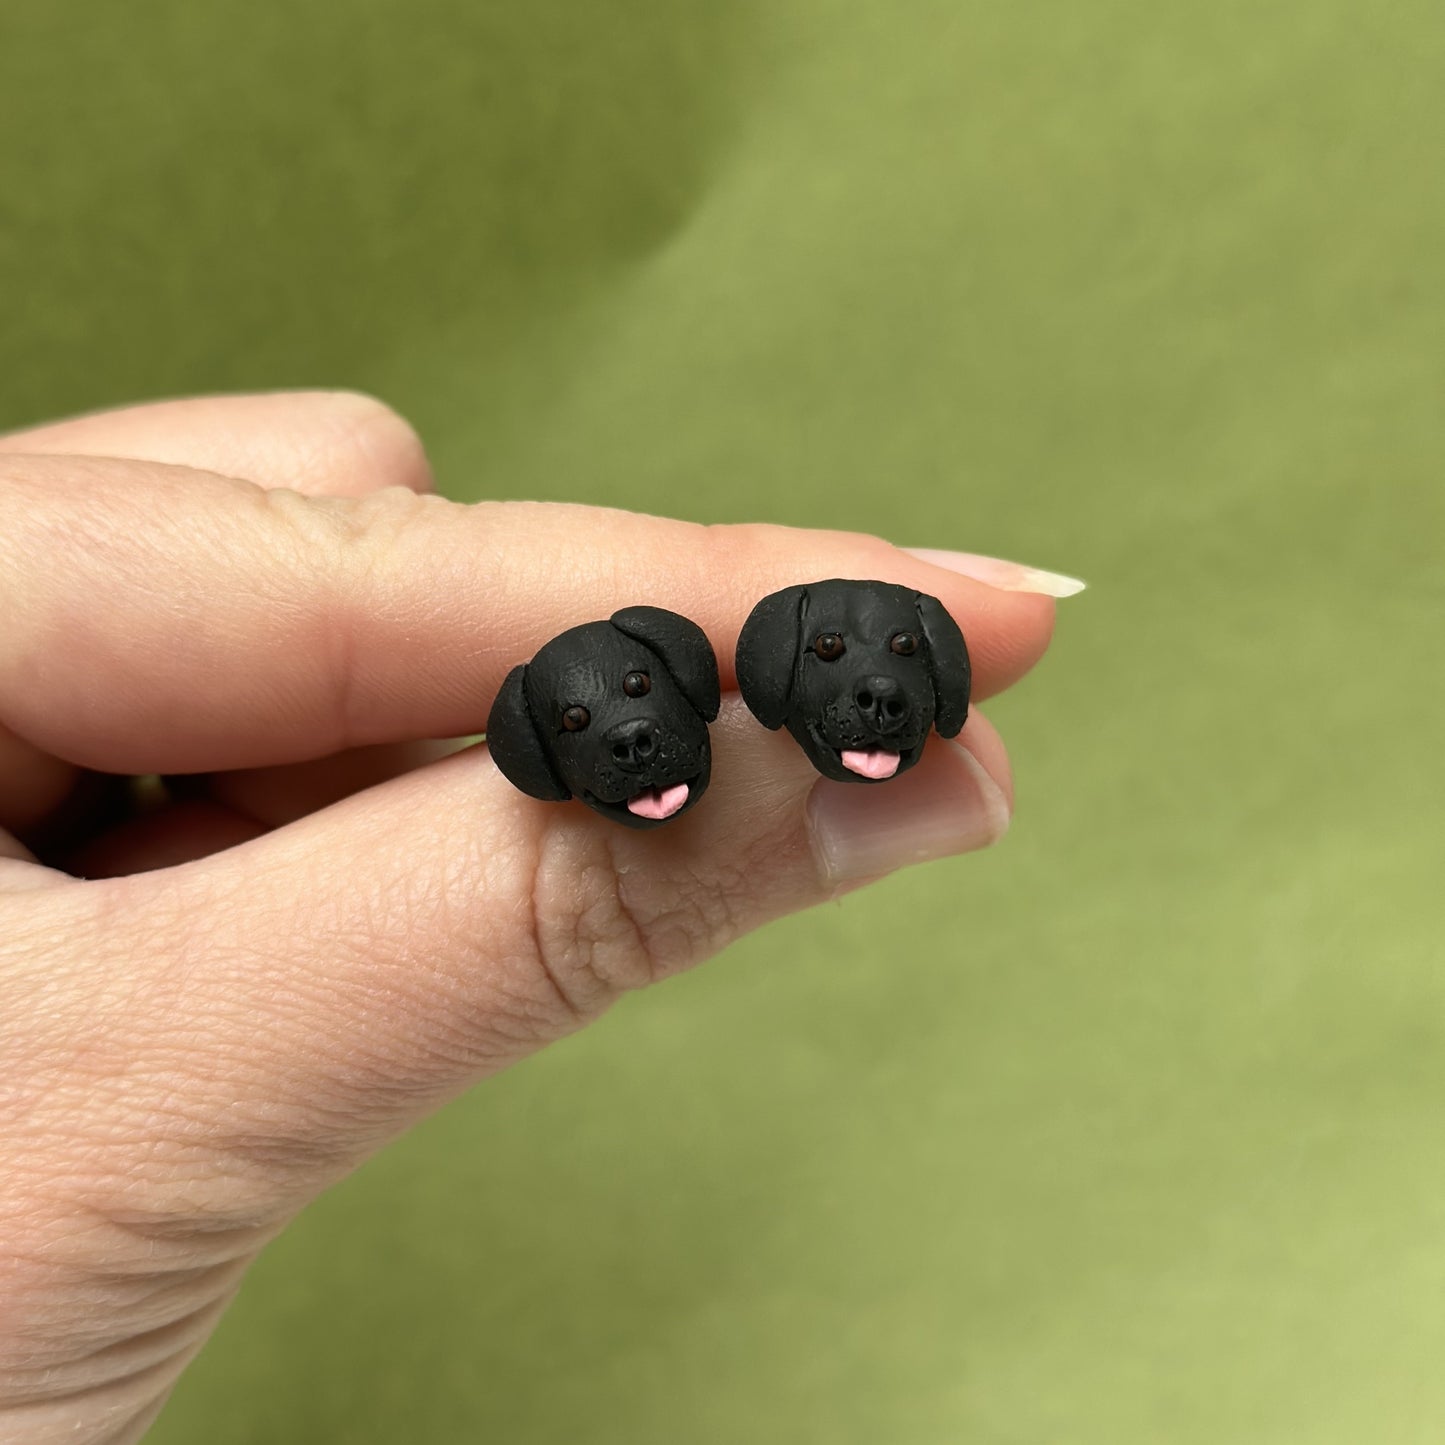 Handmade black labrador stud earrings by Pawfect Love, hold infront of green background